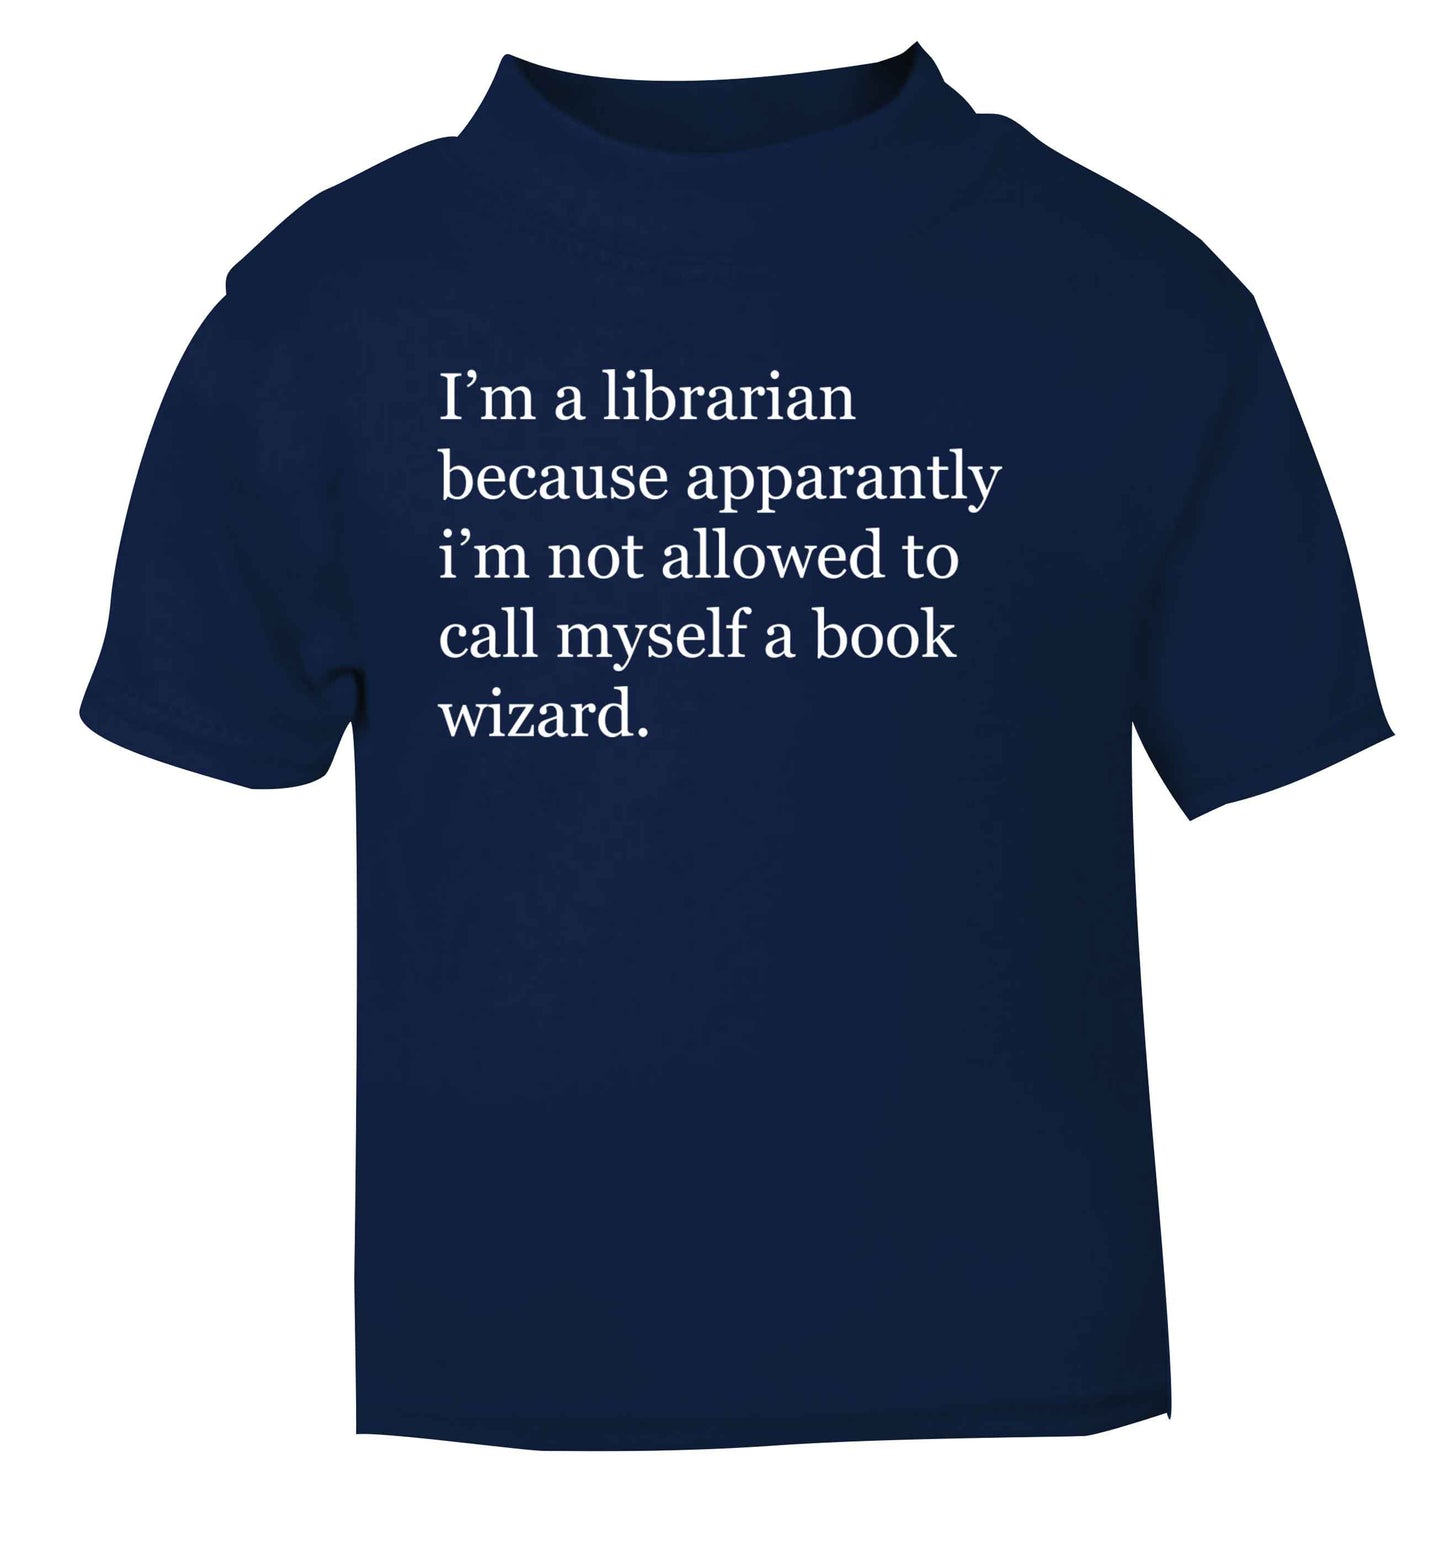 iÕm a librarian because apparantly iÕm not allowed to call myself a book wizard navy Baby Toddler Tshirt 2 Years